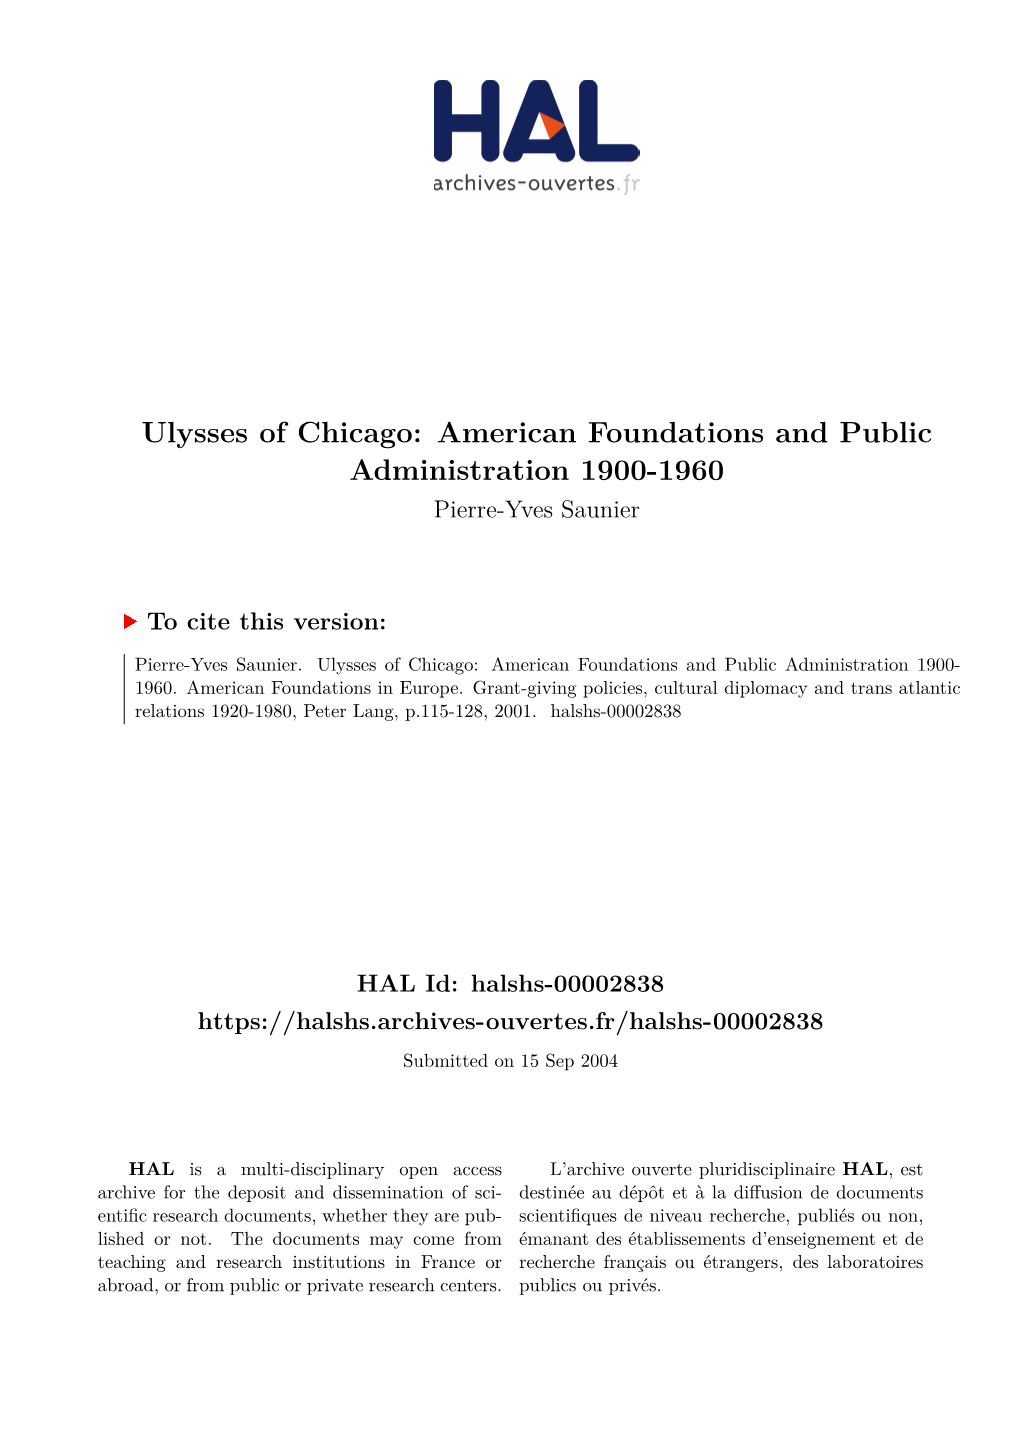 Ulysses of Chicago: American Foundations and Public Administration 1900-1960 Pierre-Yves Saunier